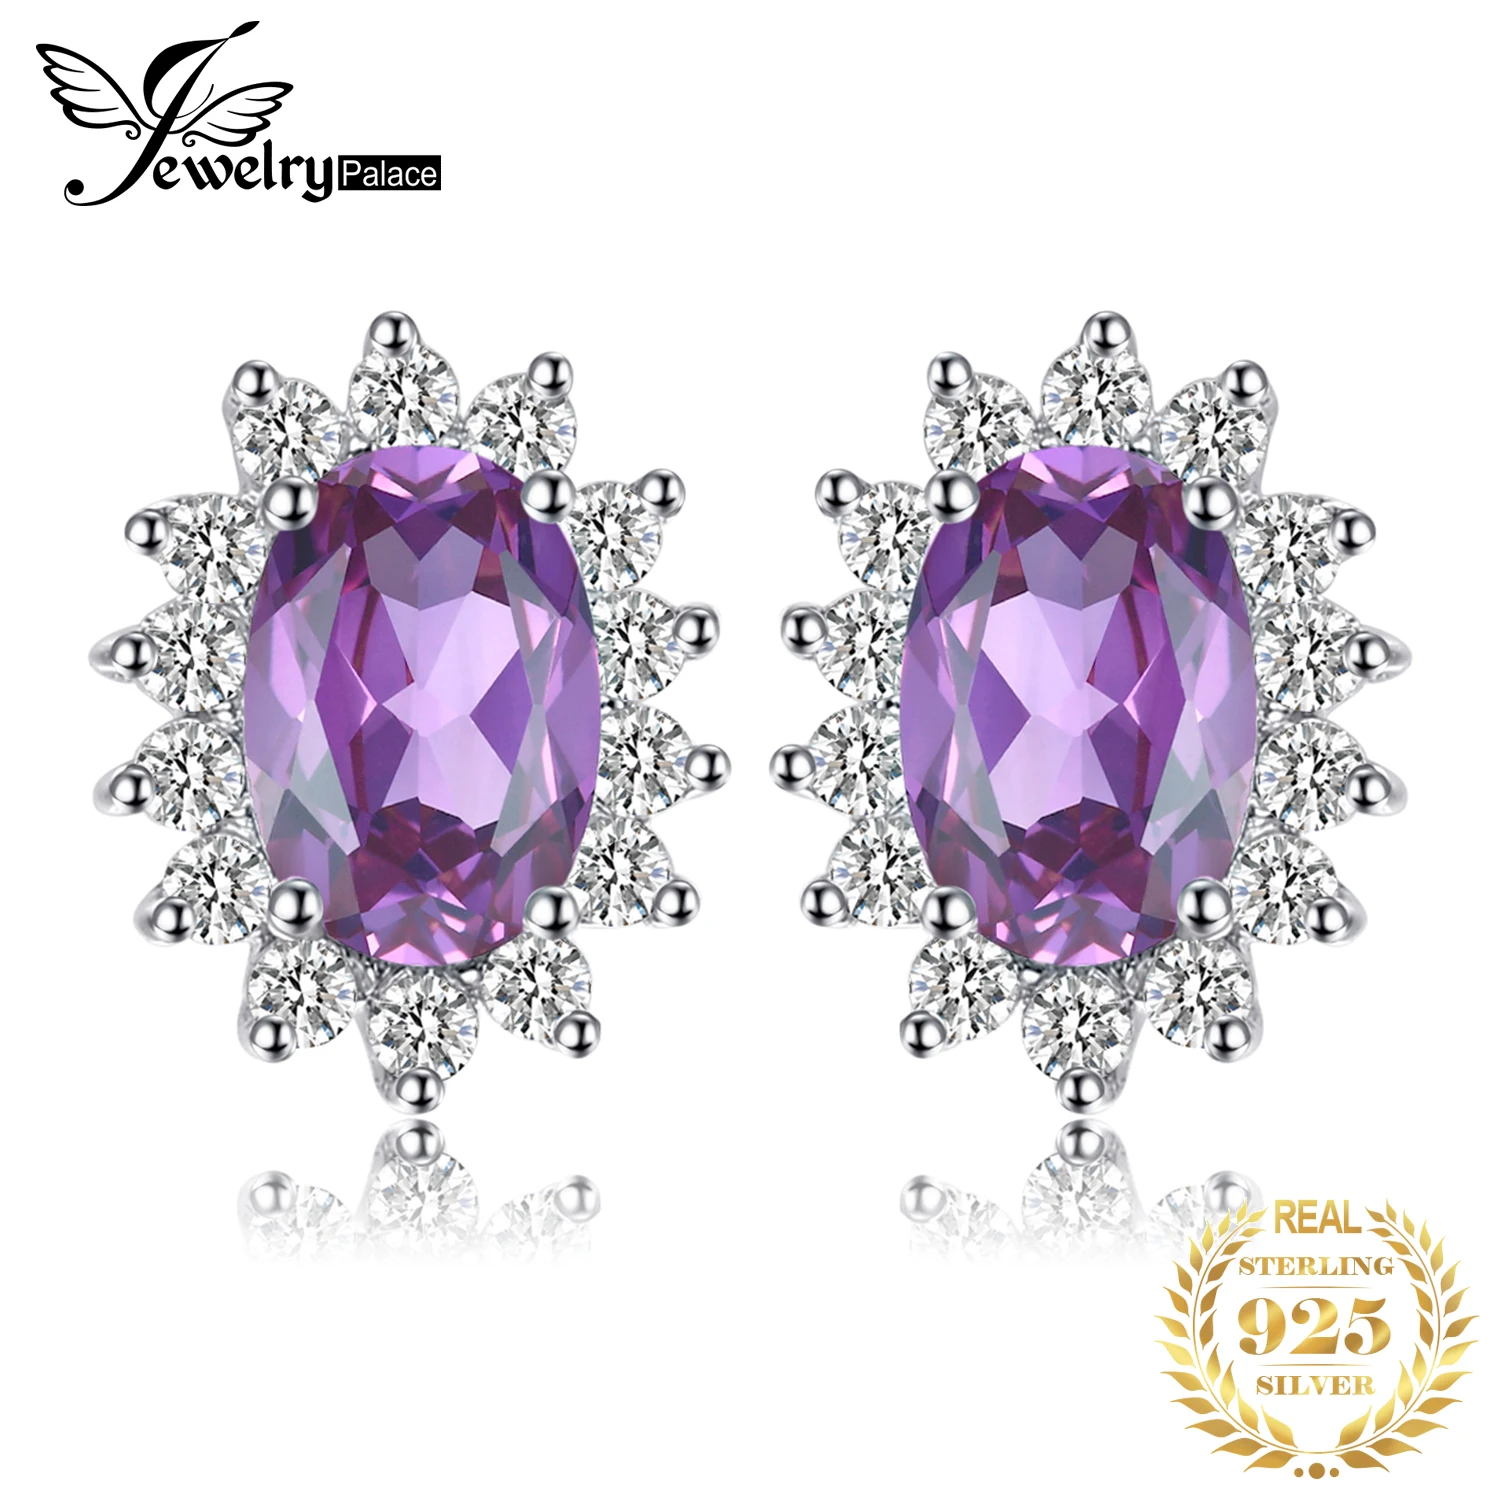 JewelryPalace Diana Natural Amethyst 925 Sterling Silver Halo Stud Earrings for Woman Fashion Classic Party Jewelry New Arrival